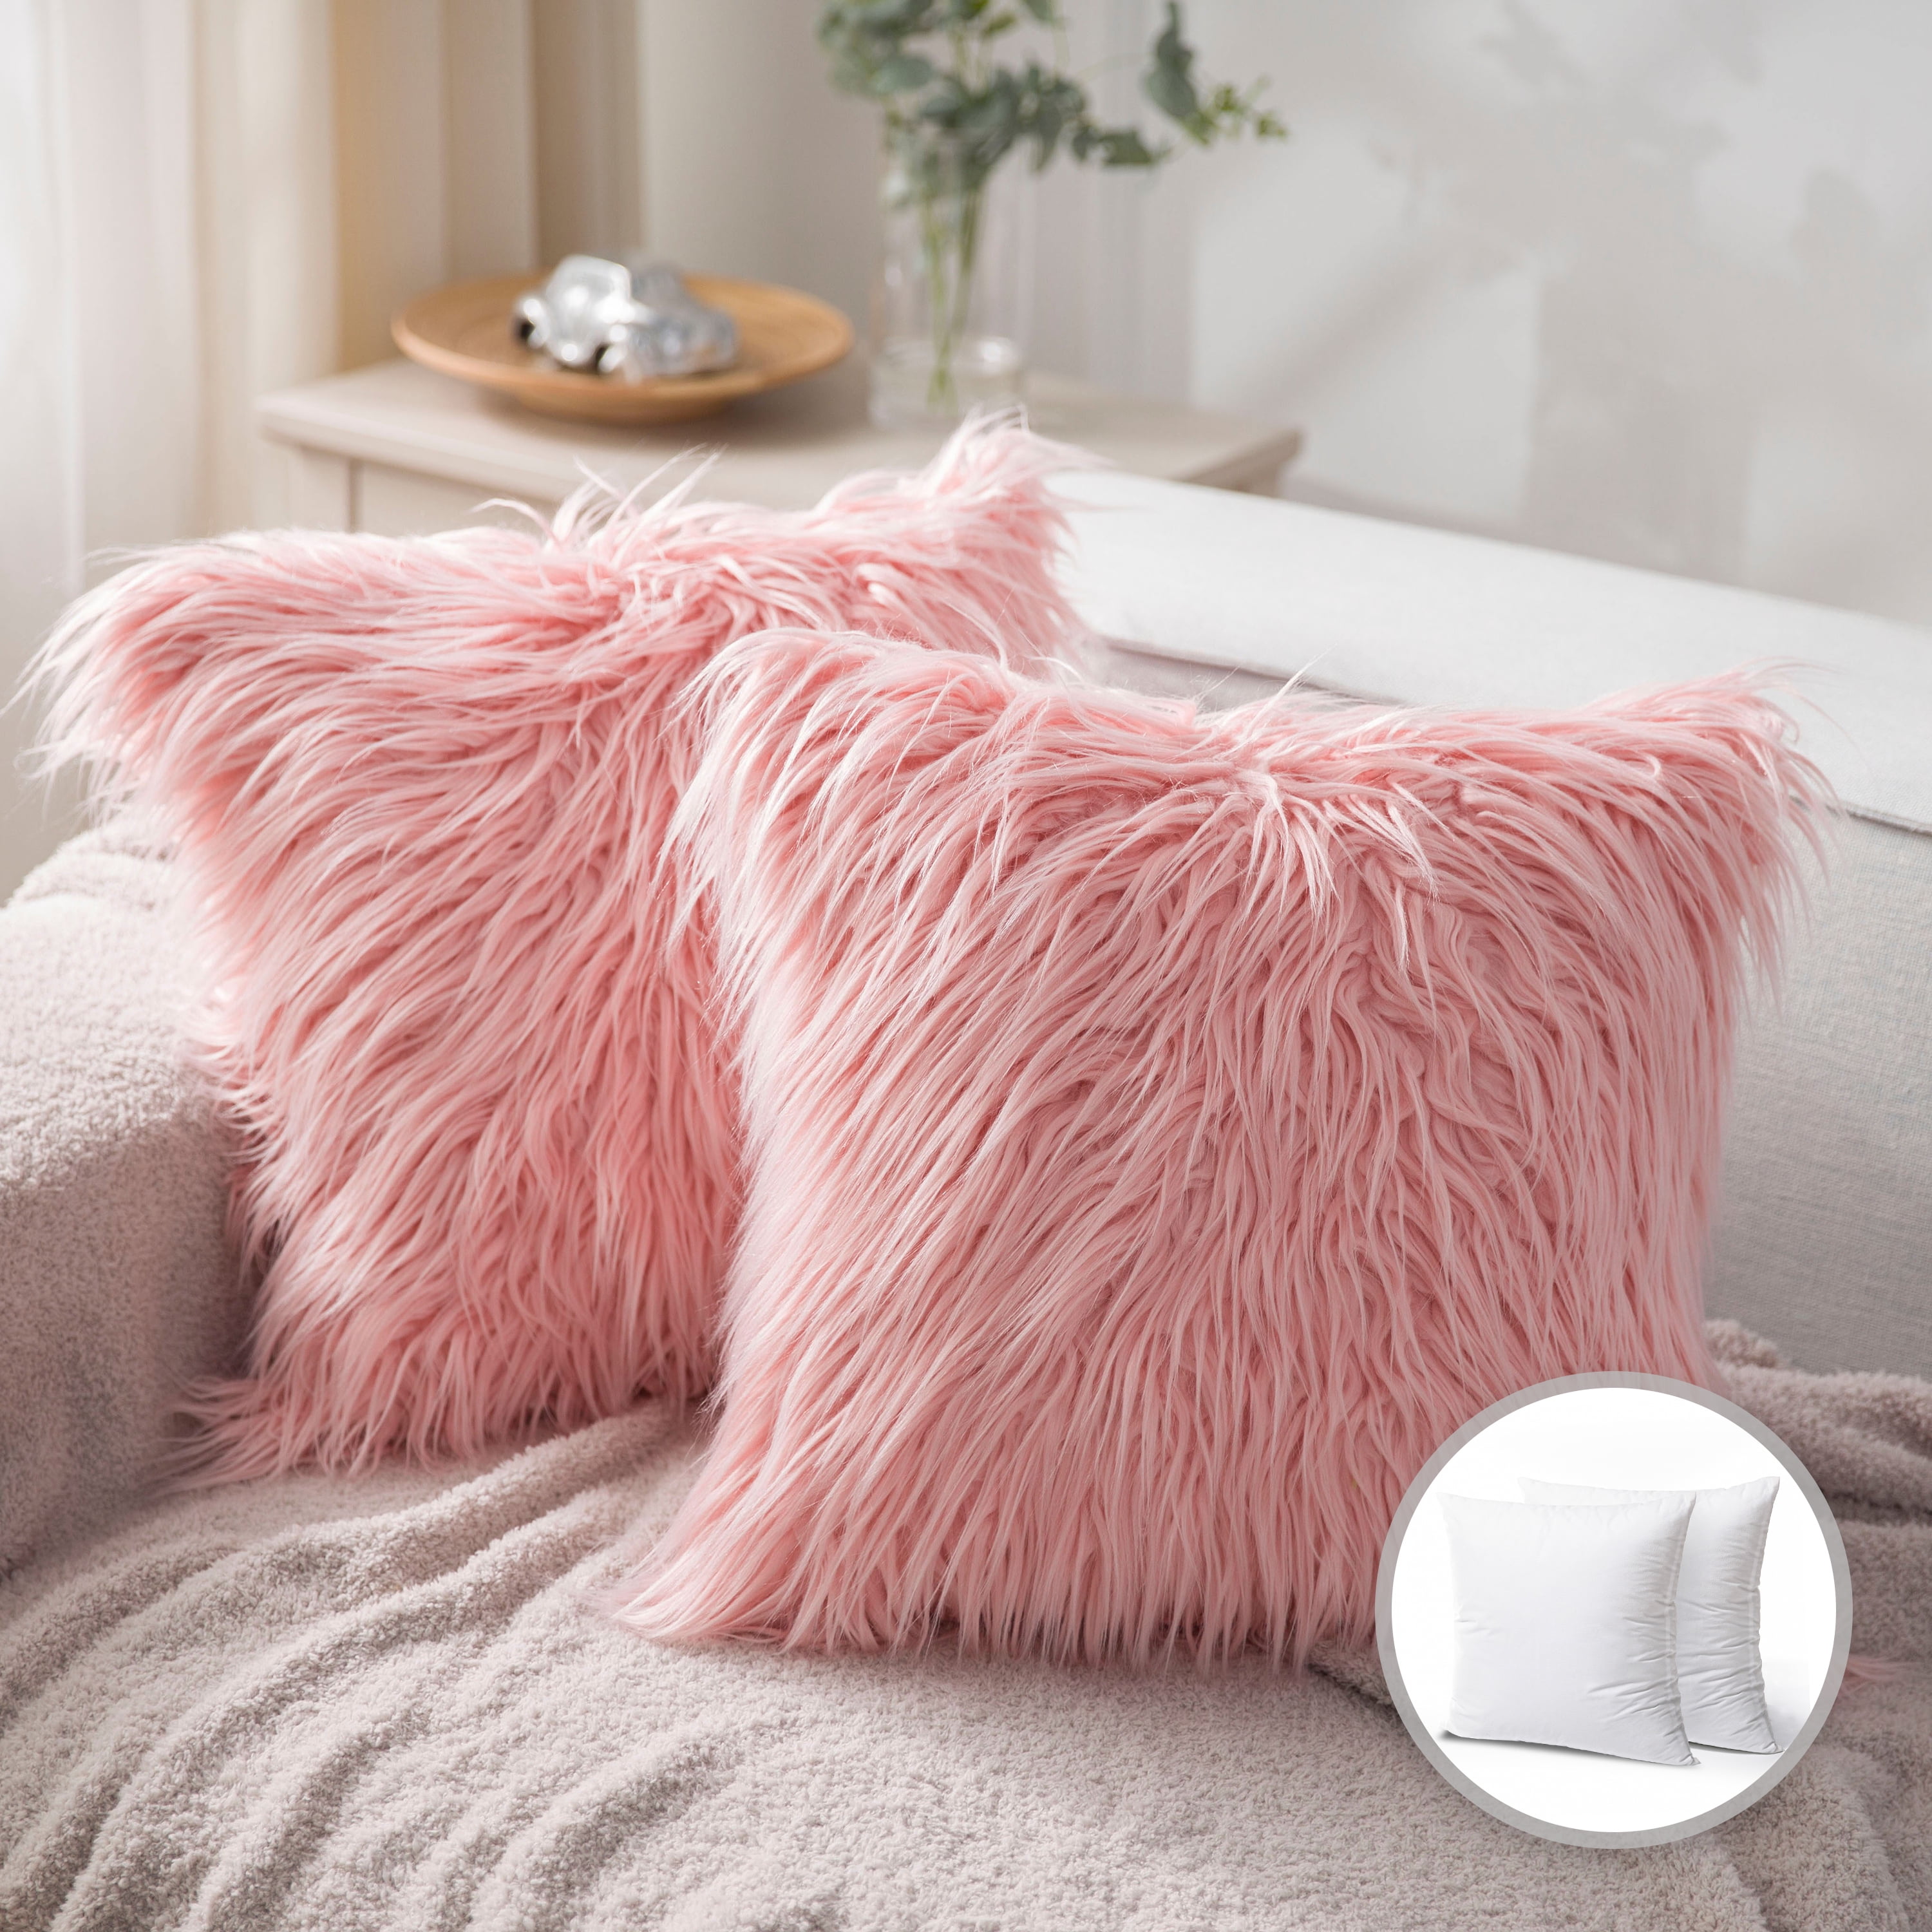 Decorative Fluffy Throw Pillows for Room Sofa Bed, Fuzzy Body Pink 8 x 25  Inch